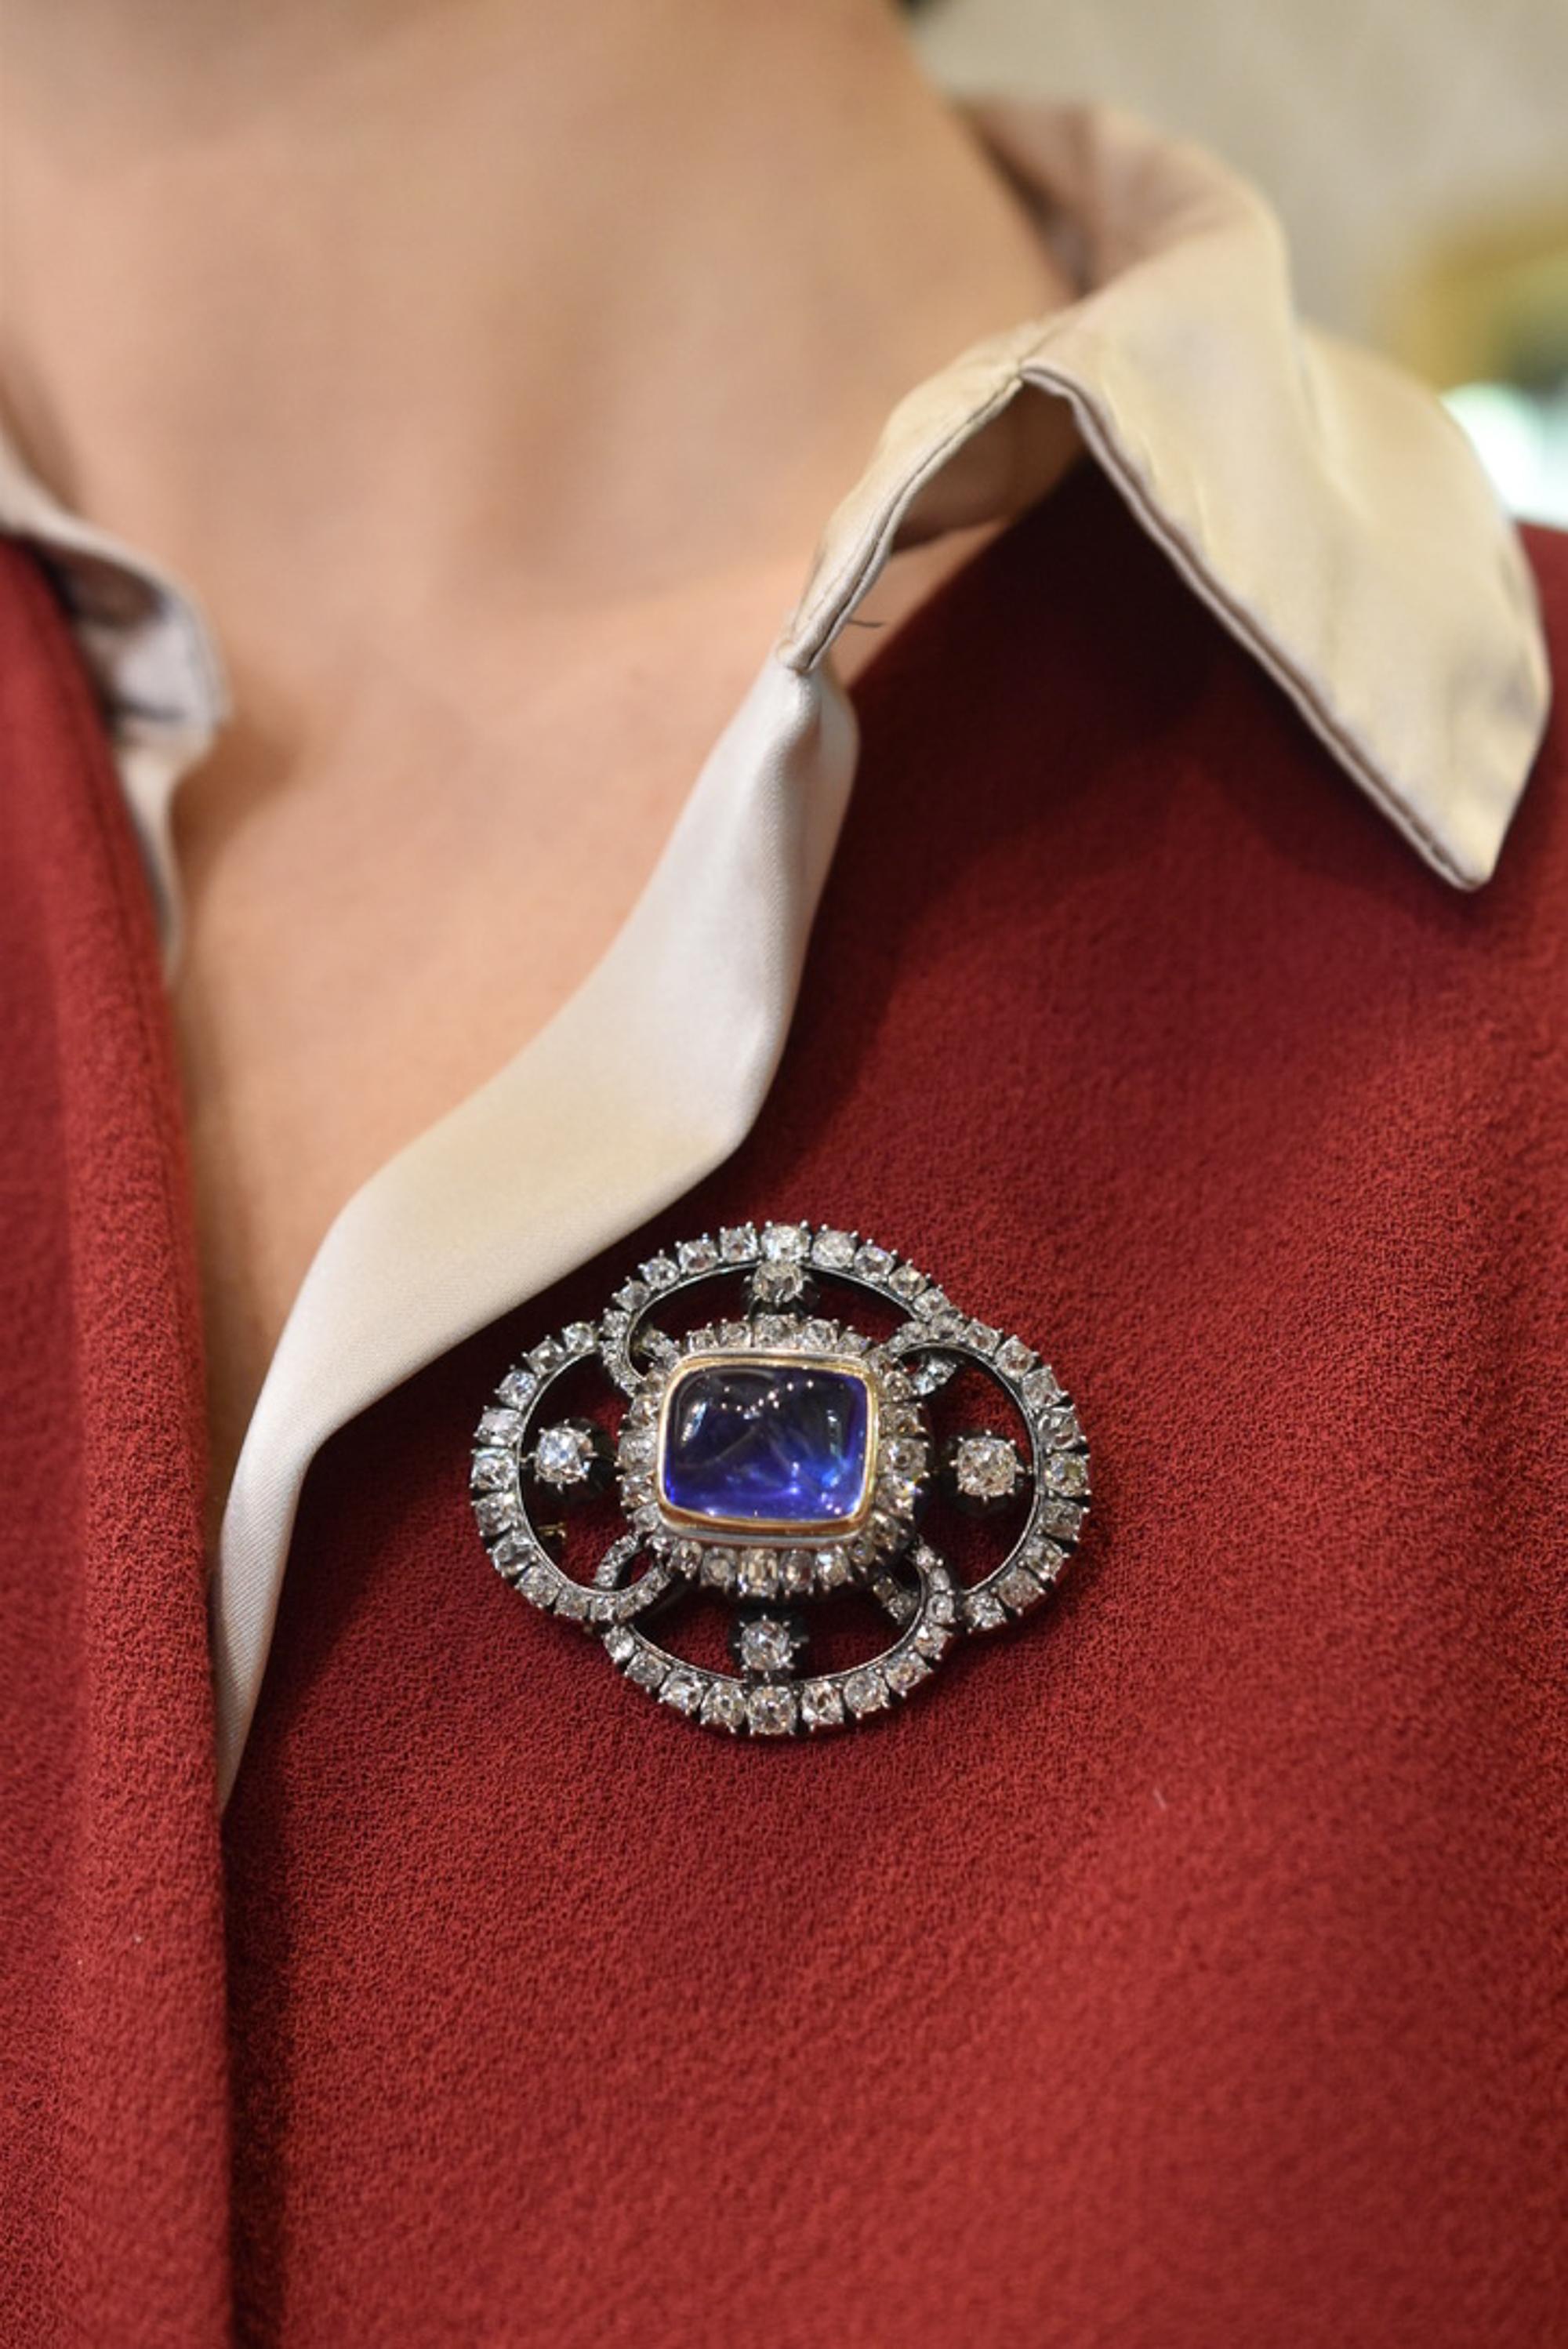 Antique French Sapphire and Diamond Brooch in silver backed gold, showcasing 9 carats of Old cut Diamonds and a 20ct No Heat Sugarloaf Ceylon Sapphire.
Made in France, Mid 19th Century.